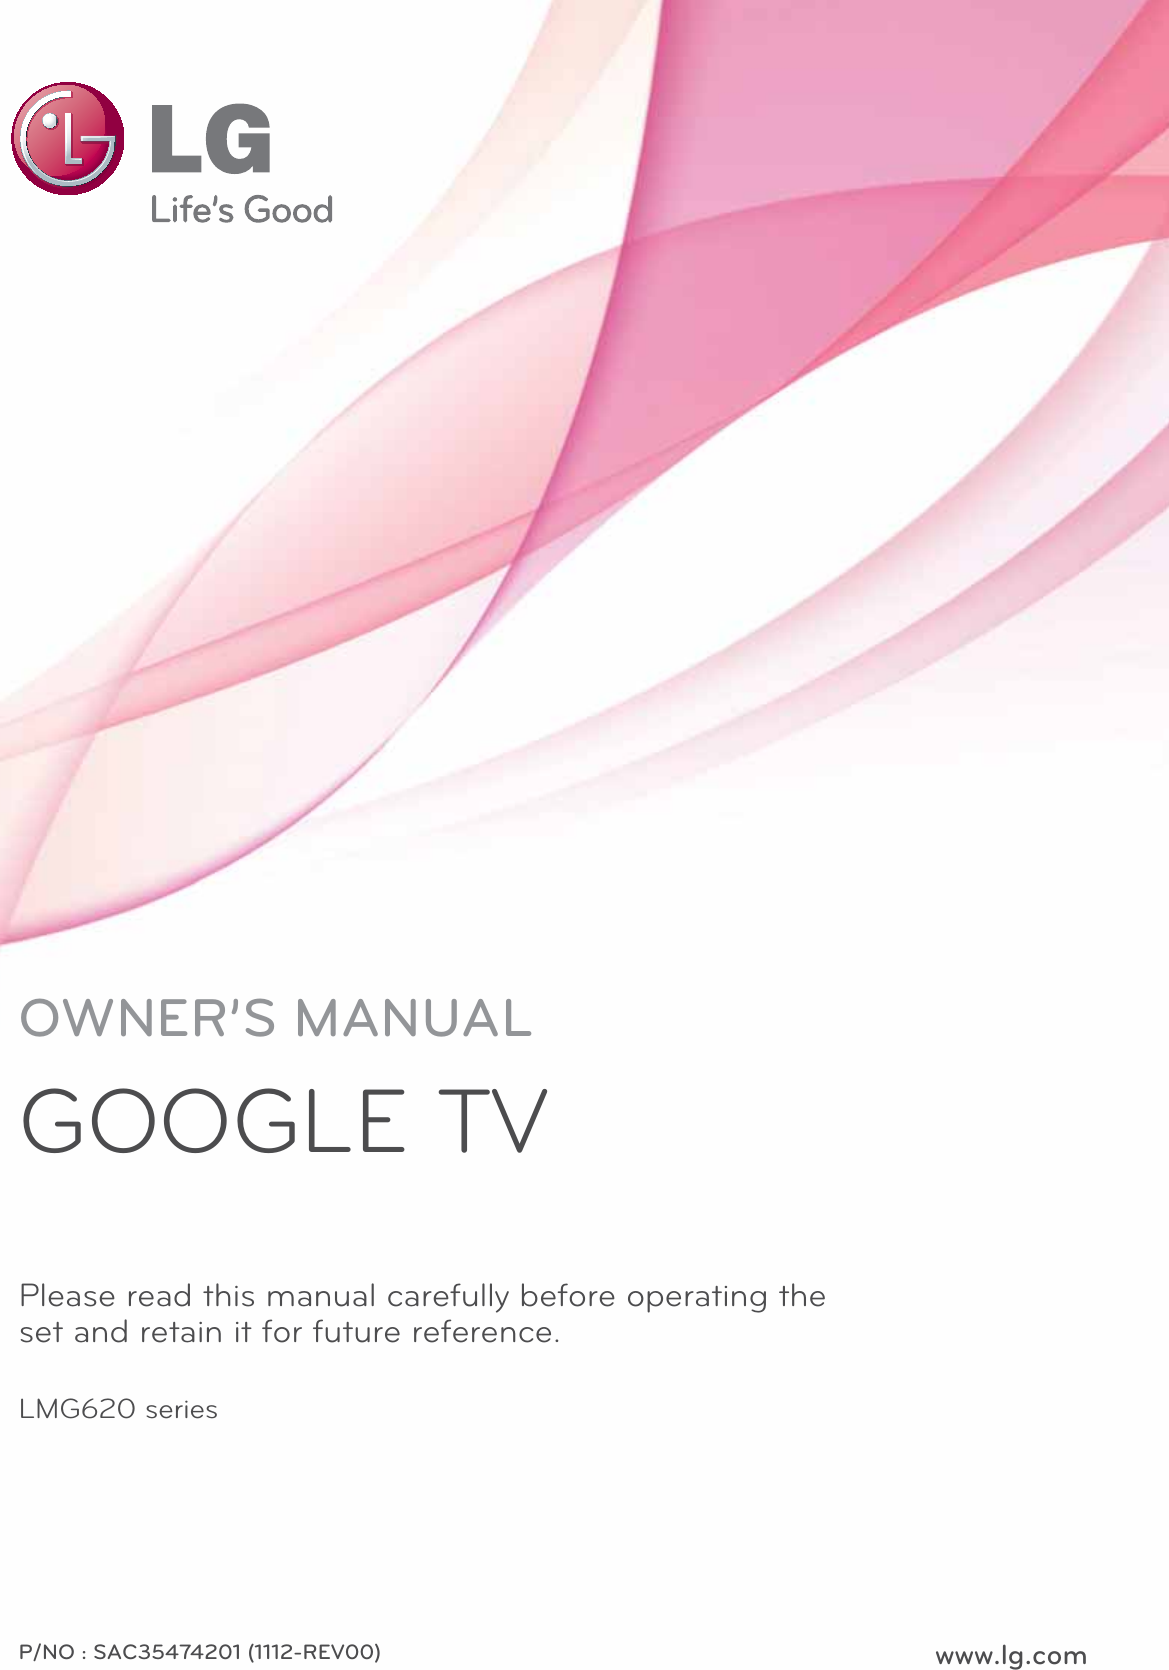 OWNER’S MANUALGOOGLE TVPlease read this manual carefully before operating the set and retain it for future reference.LMG620 seriesP/NO : SAC35474201 (1112-REV00) www.lg.com